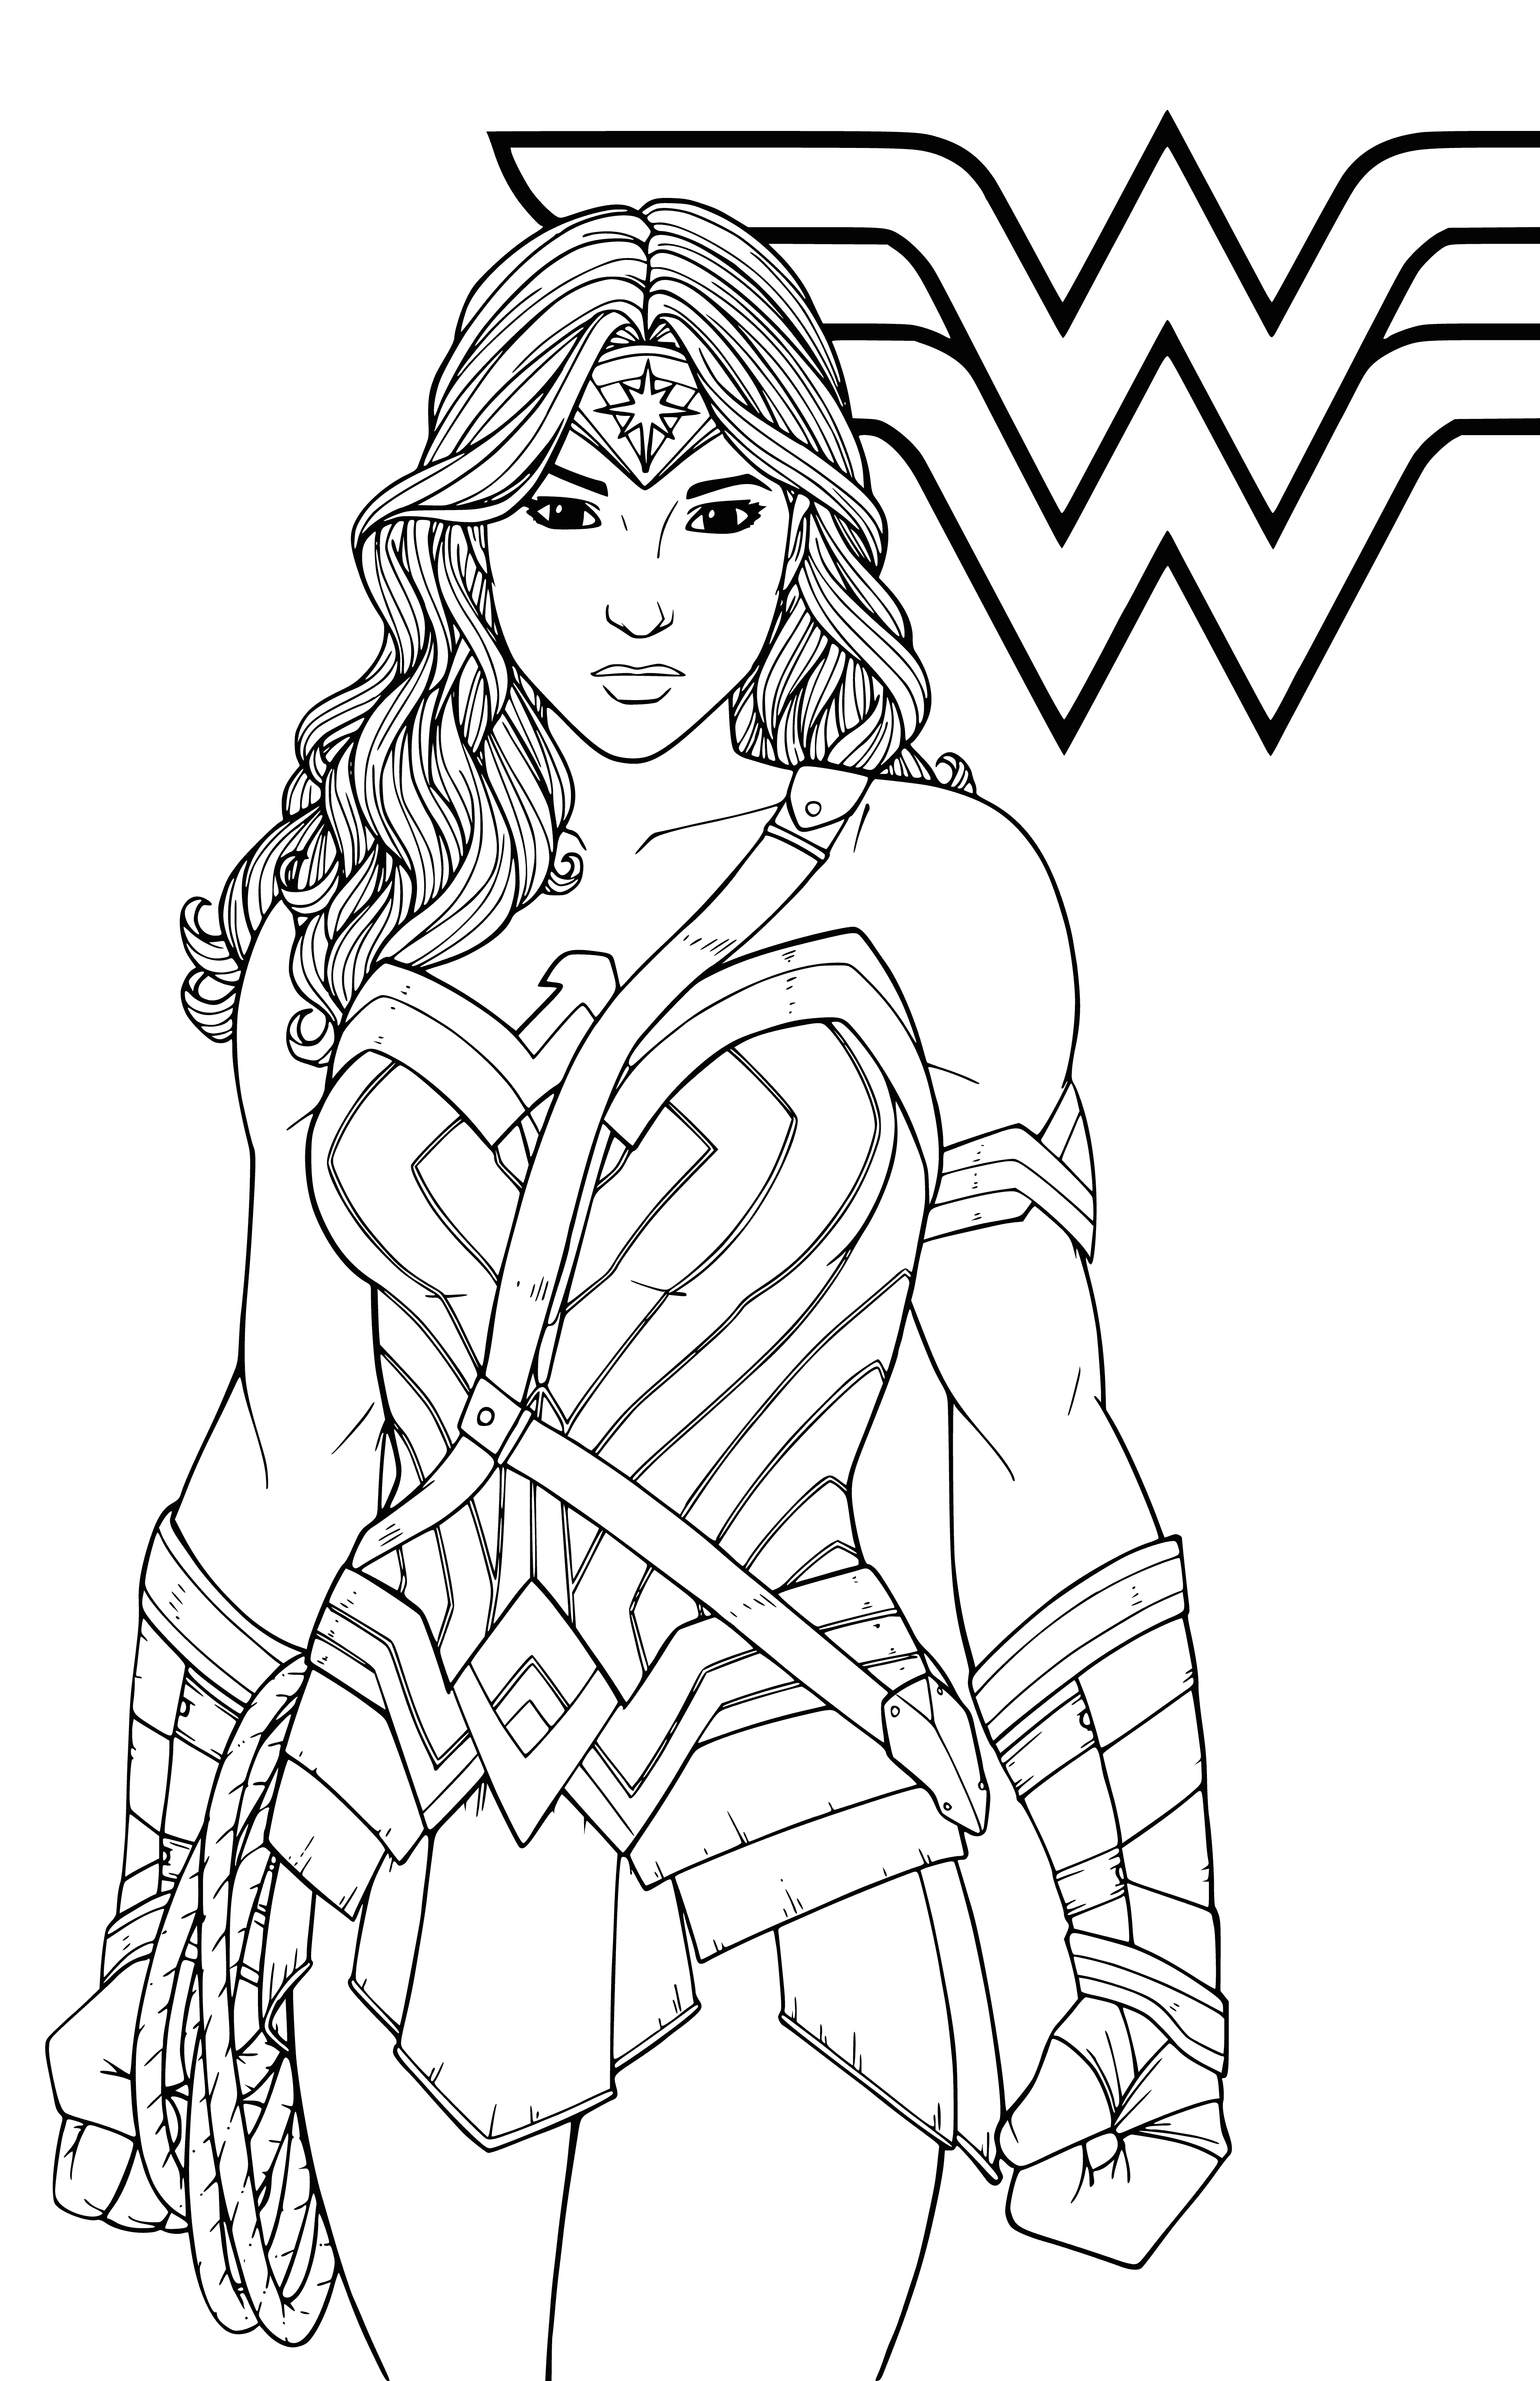 coloring page: She's Wonder Woman: a confident warrior for justice with a long dark mane, bright blue eyes, iconic suit, and lasso of truth.